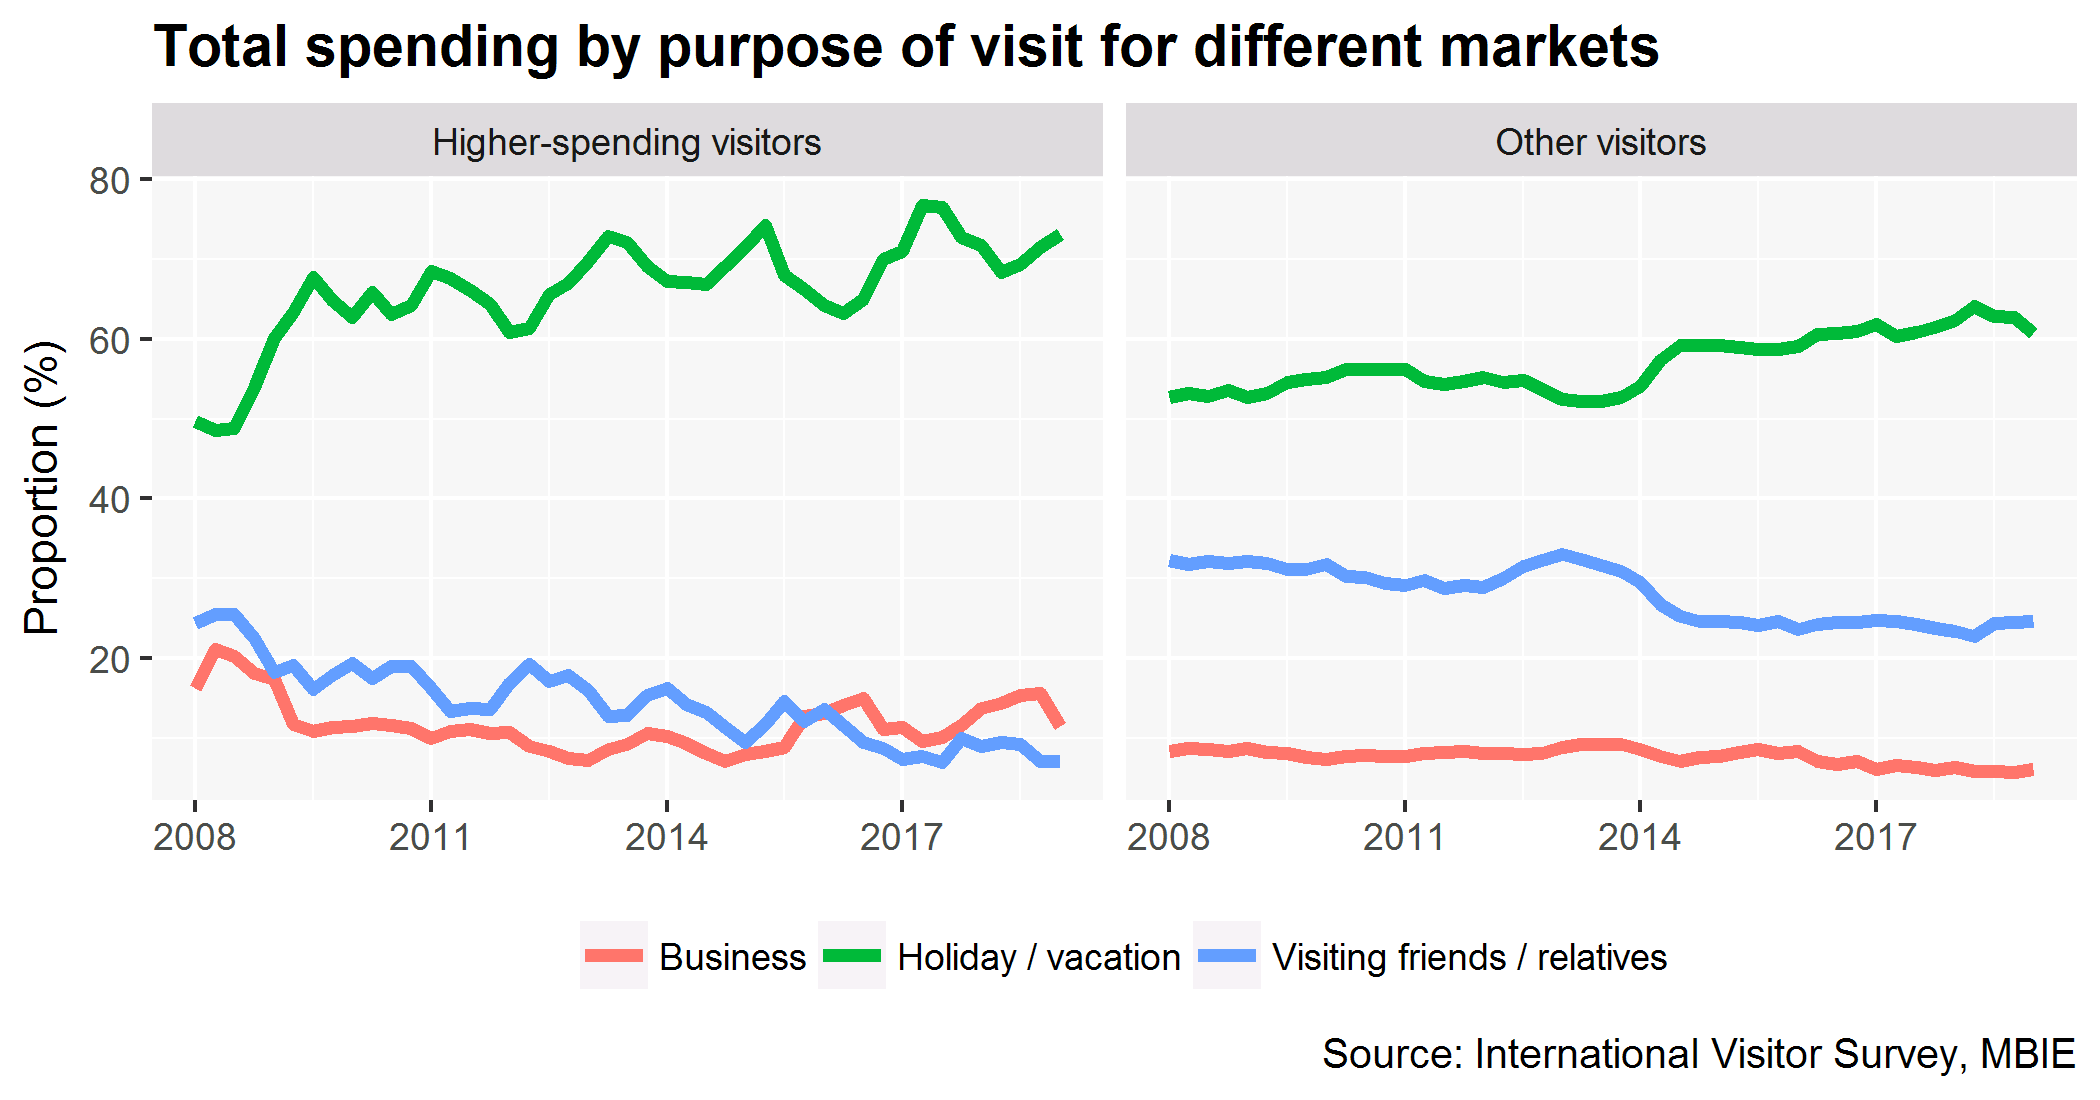 Proportion of spending by purpose of visit for higher-spending visitor and others